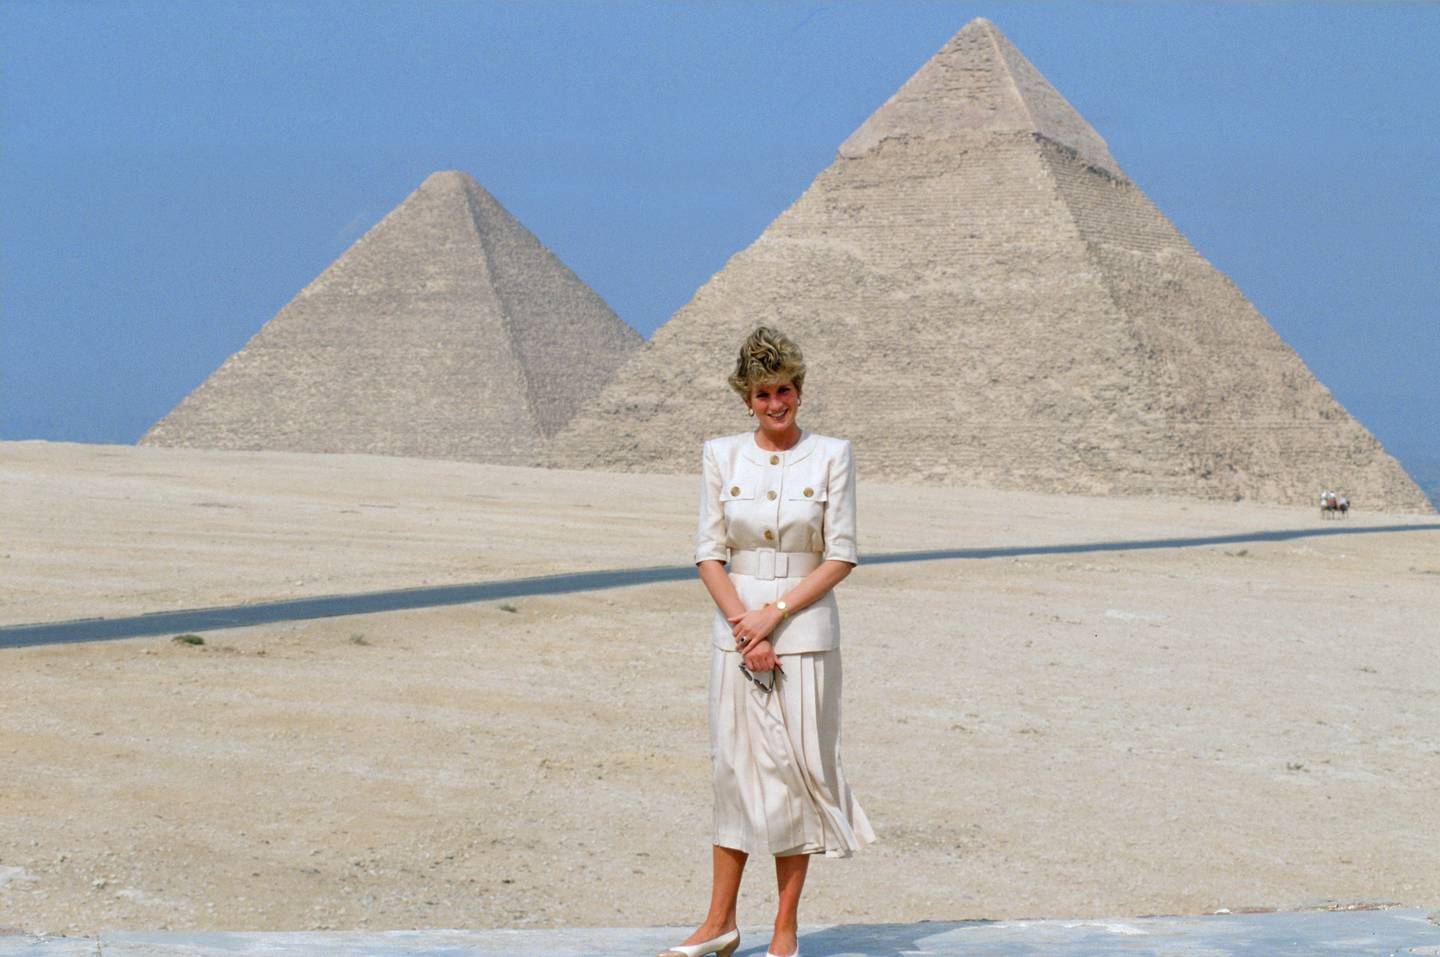 EGYPT - MAY 12: Diana, Princess of Wales visits the Pyramids at Giza during an official tour of Egypt (Photo by Tim Graham/Getty Images)